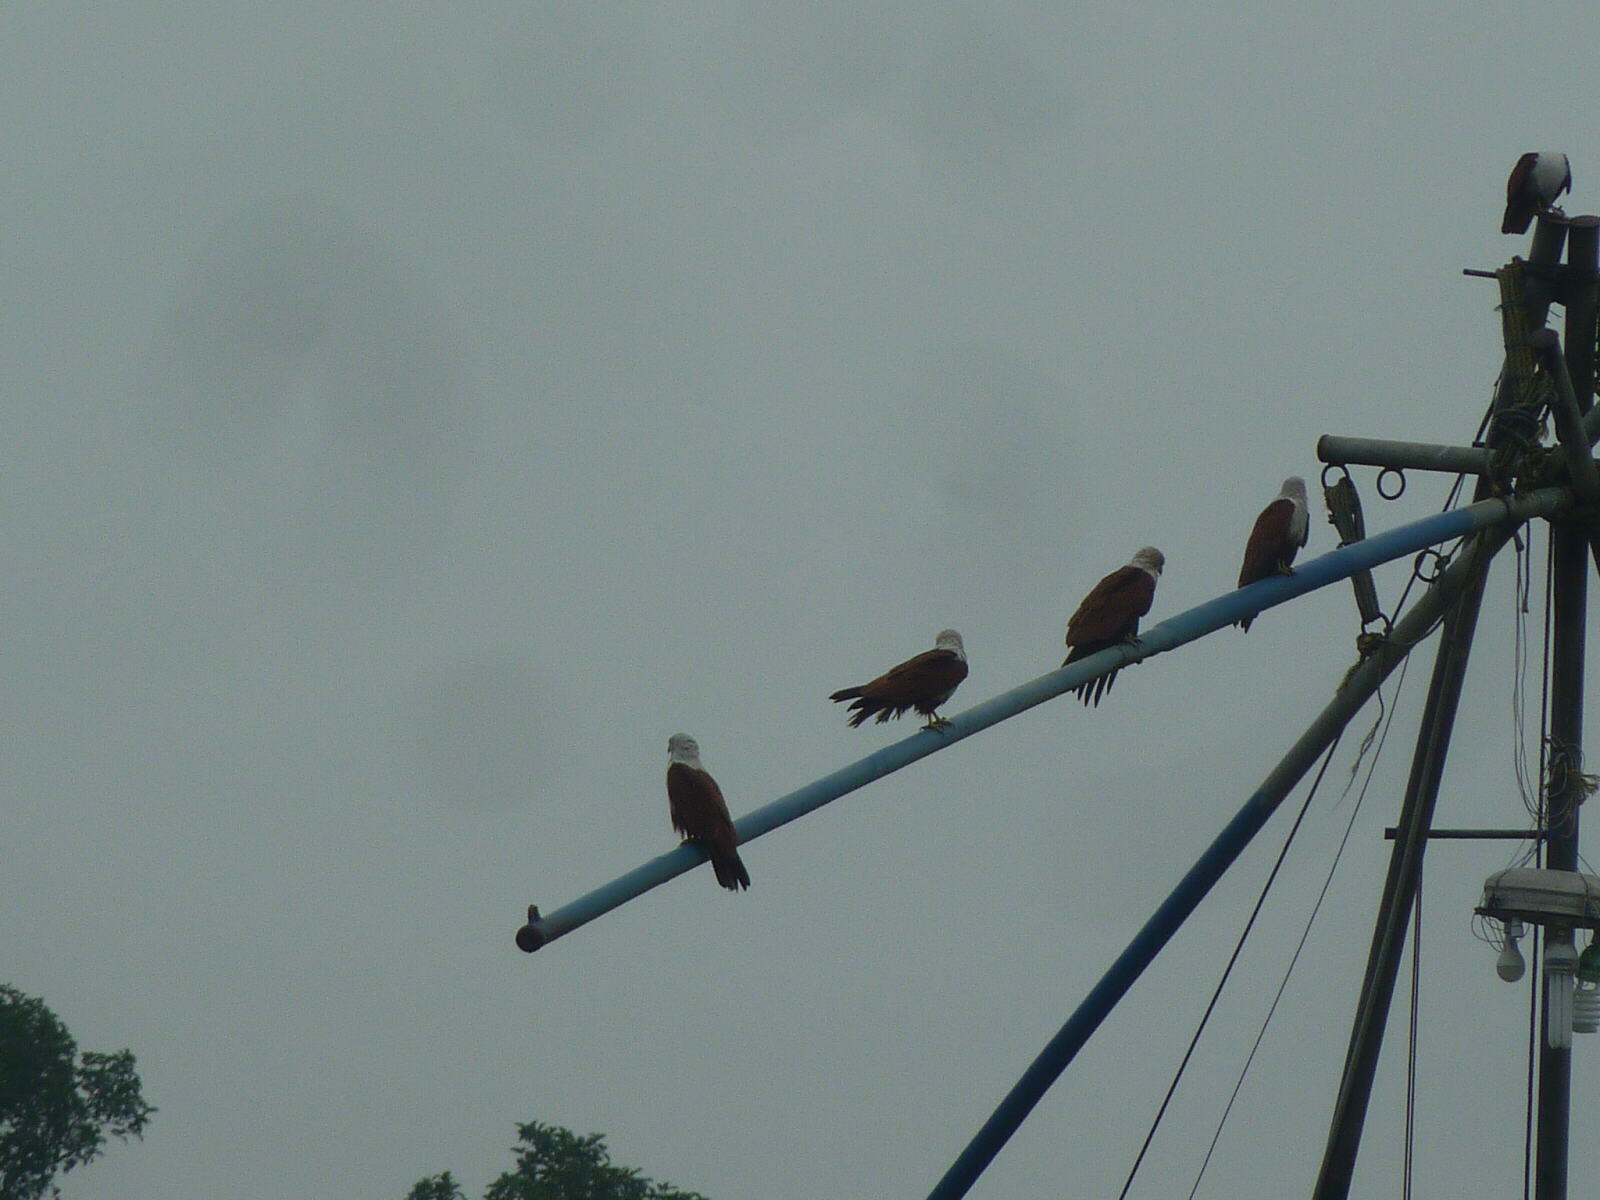 Eagles on the backwaters in Kerala, India